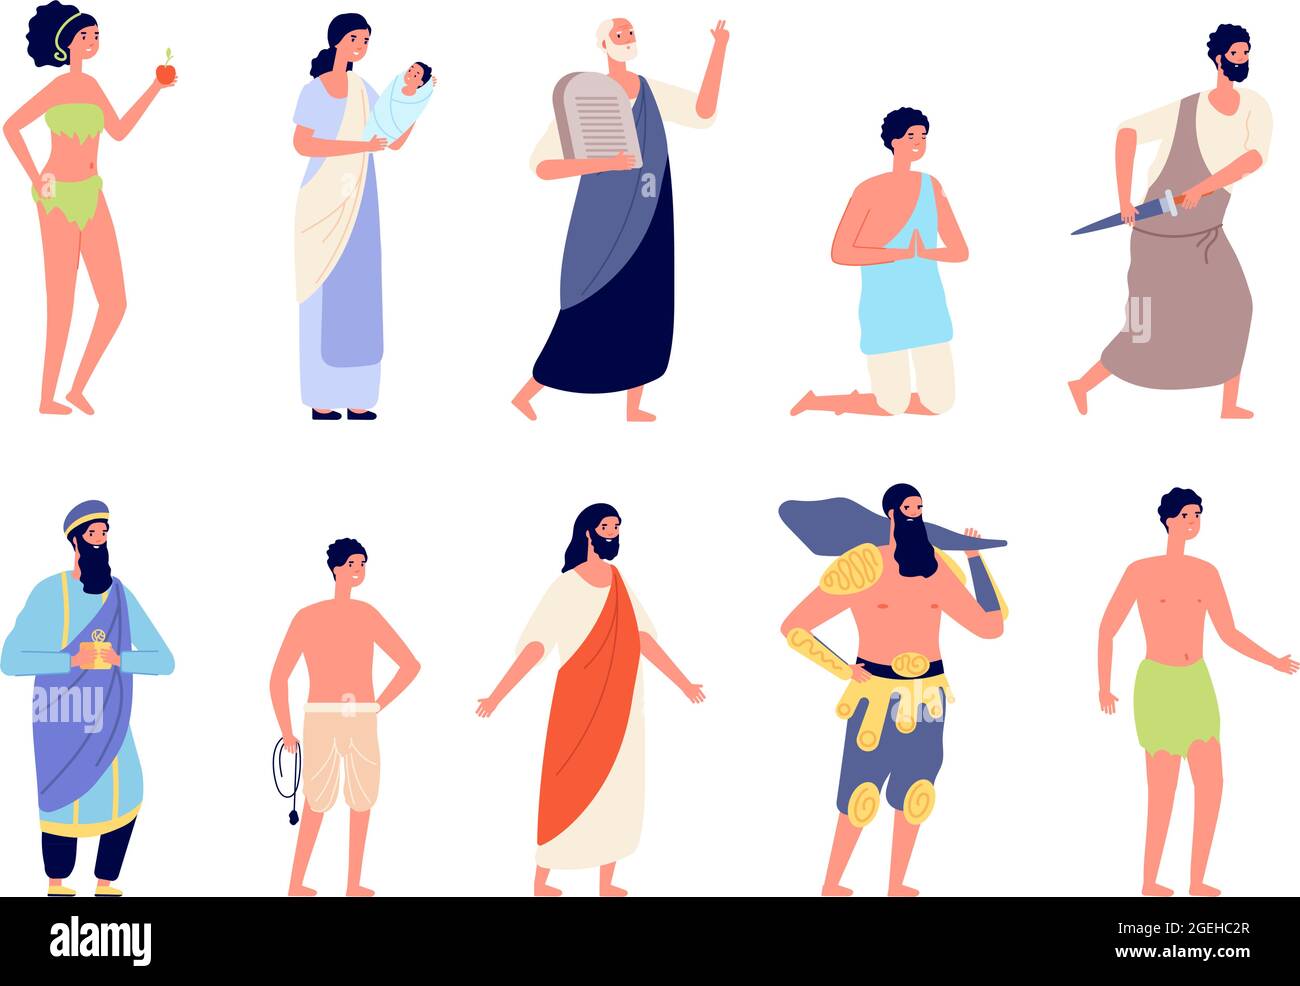 Holy bible characters. Legendary man, christian religion persons. Jesus christ, biblical newborn birth and spiritual king utter vector set Stock Vector